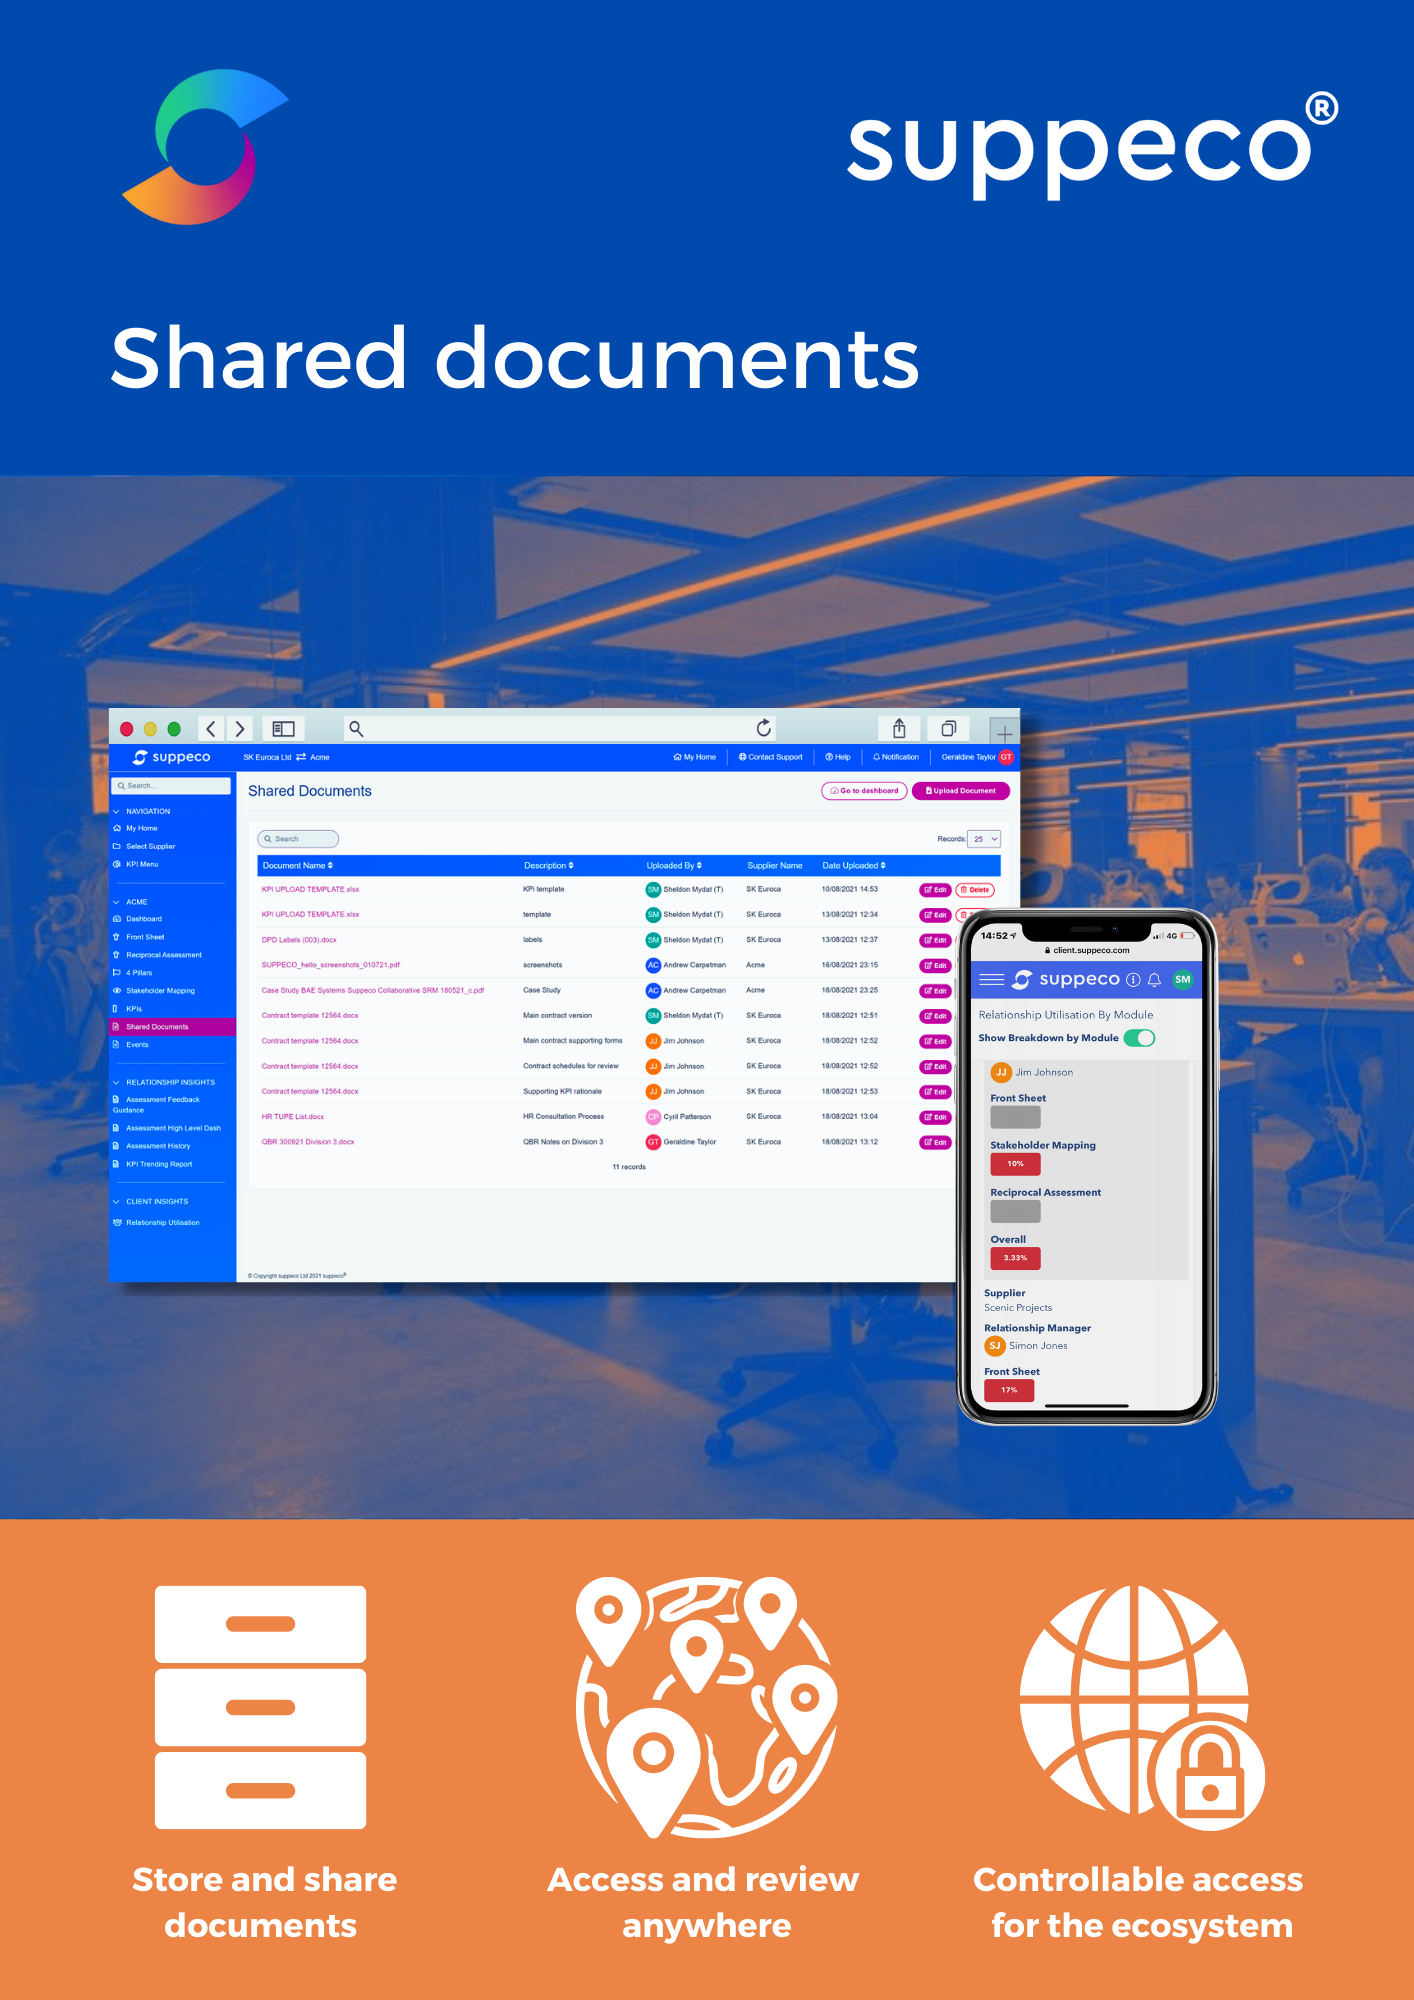 Share and collaborate with documents. Store and share. Access and review anywhere. Controllable access for the entire ecosystem.